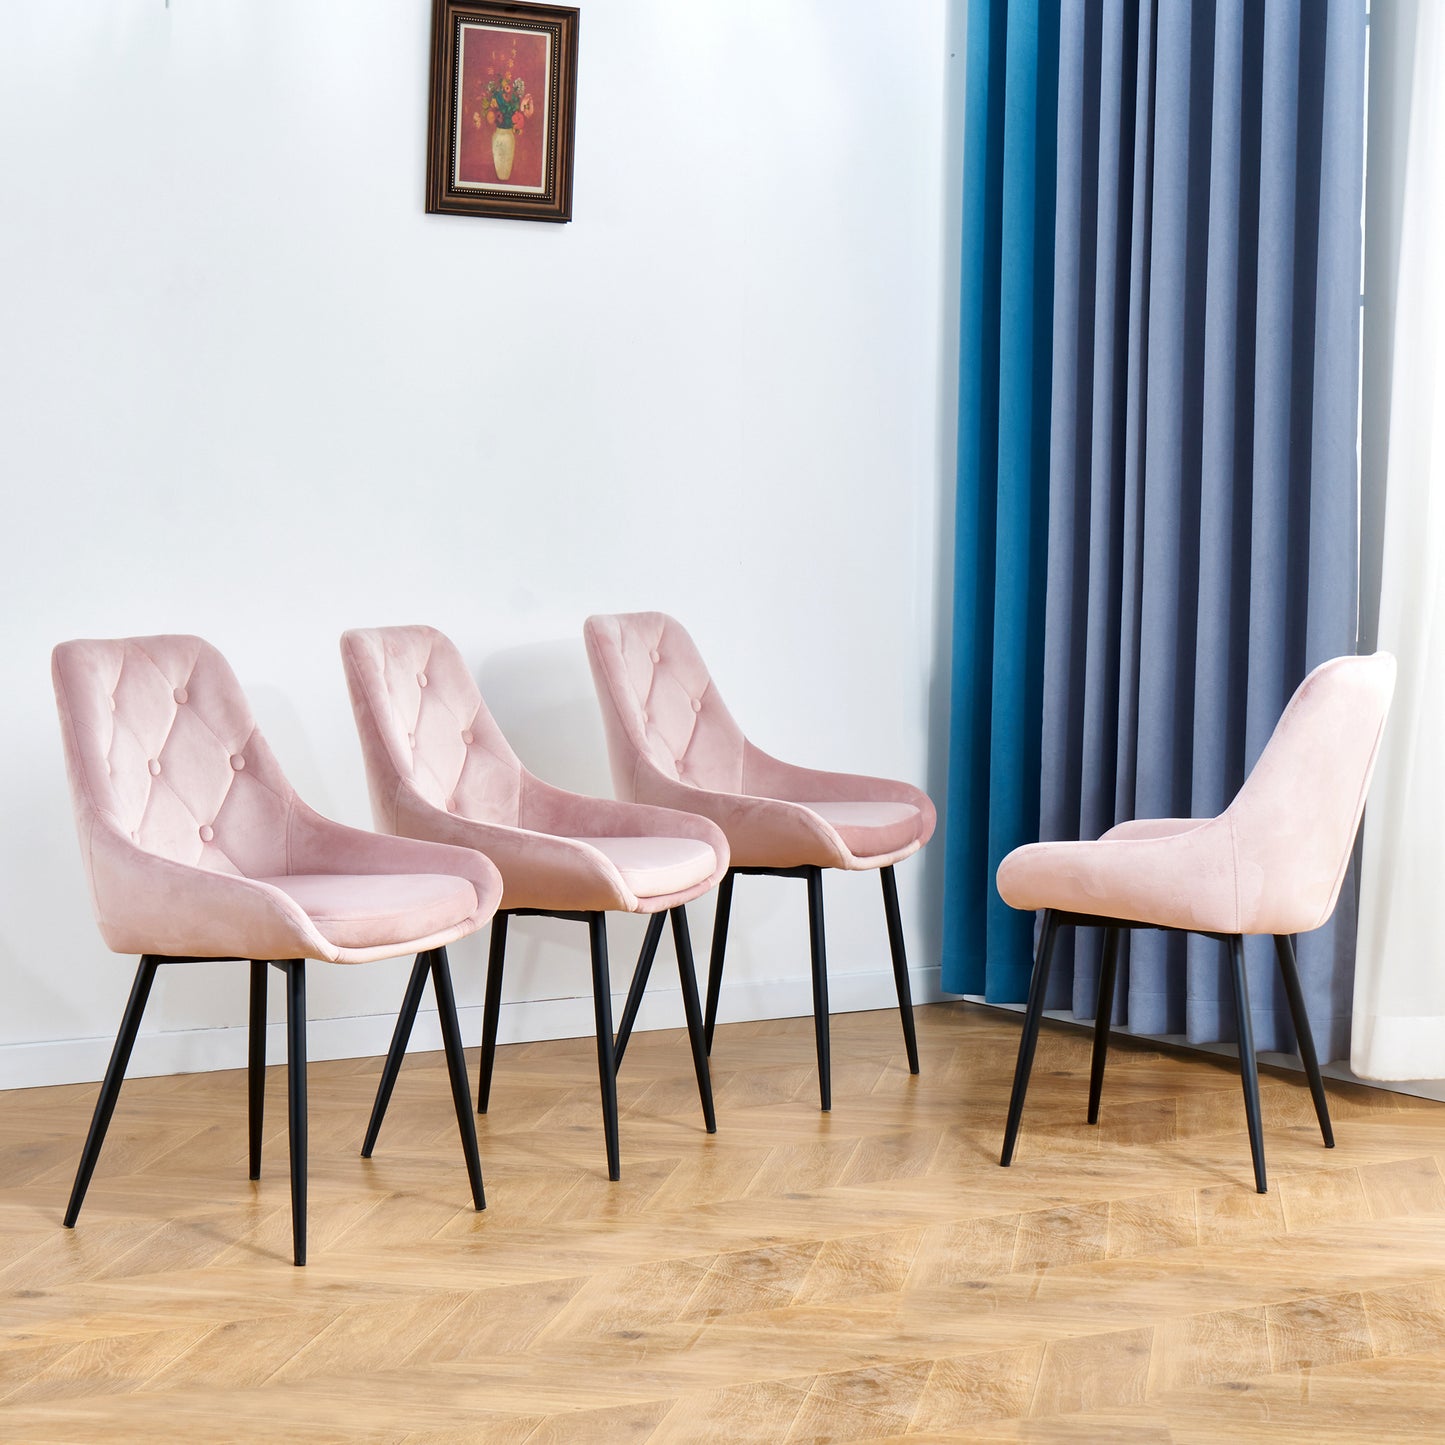 Modern Pink Velvet Dining Chairs, Fabric Accent Upholstered Chairs Side Chair with Black Legs for Home Furniture Living Room Bedroom Kitchen dining room (set of 2)